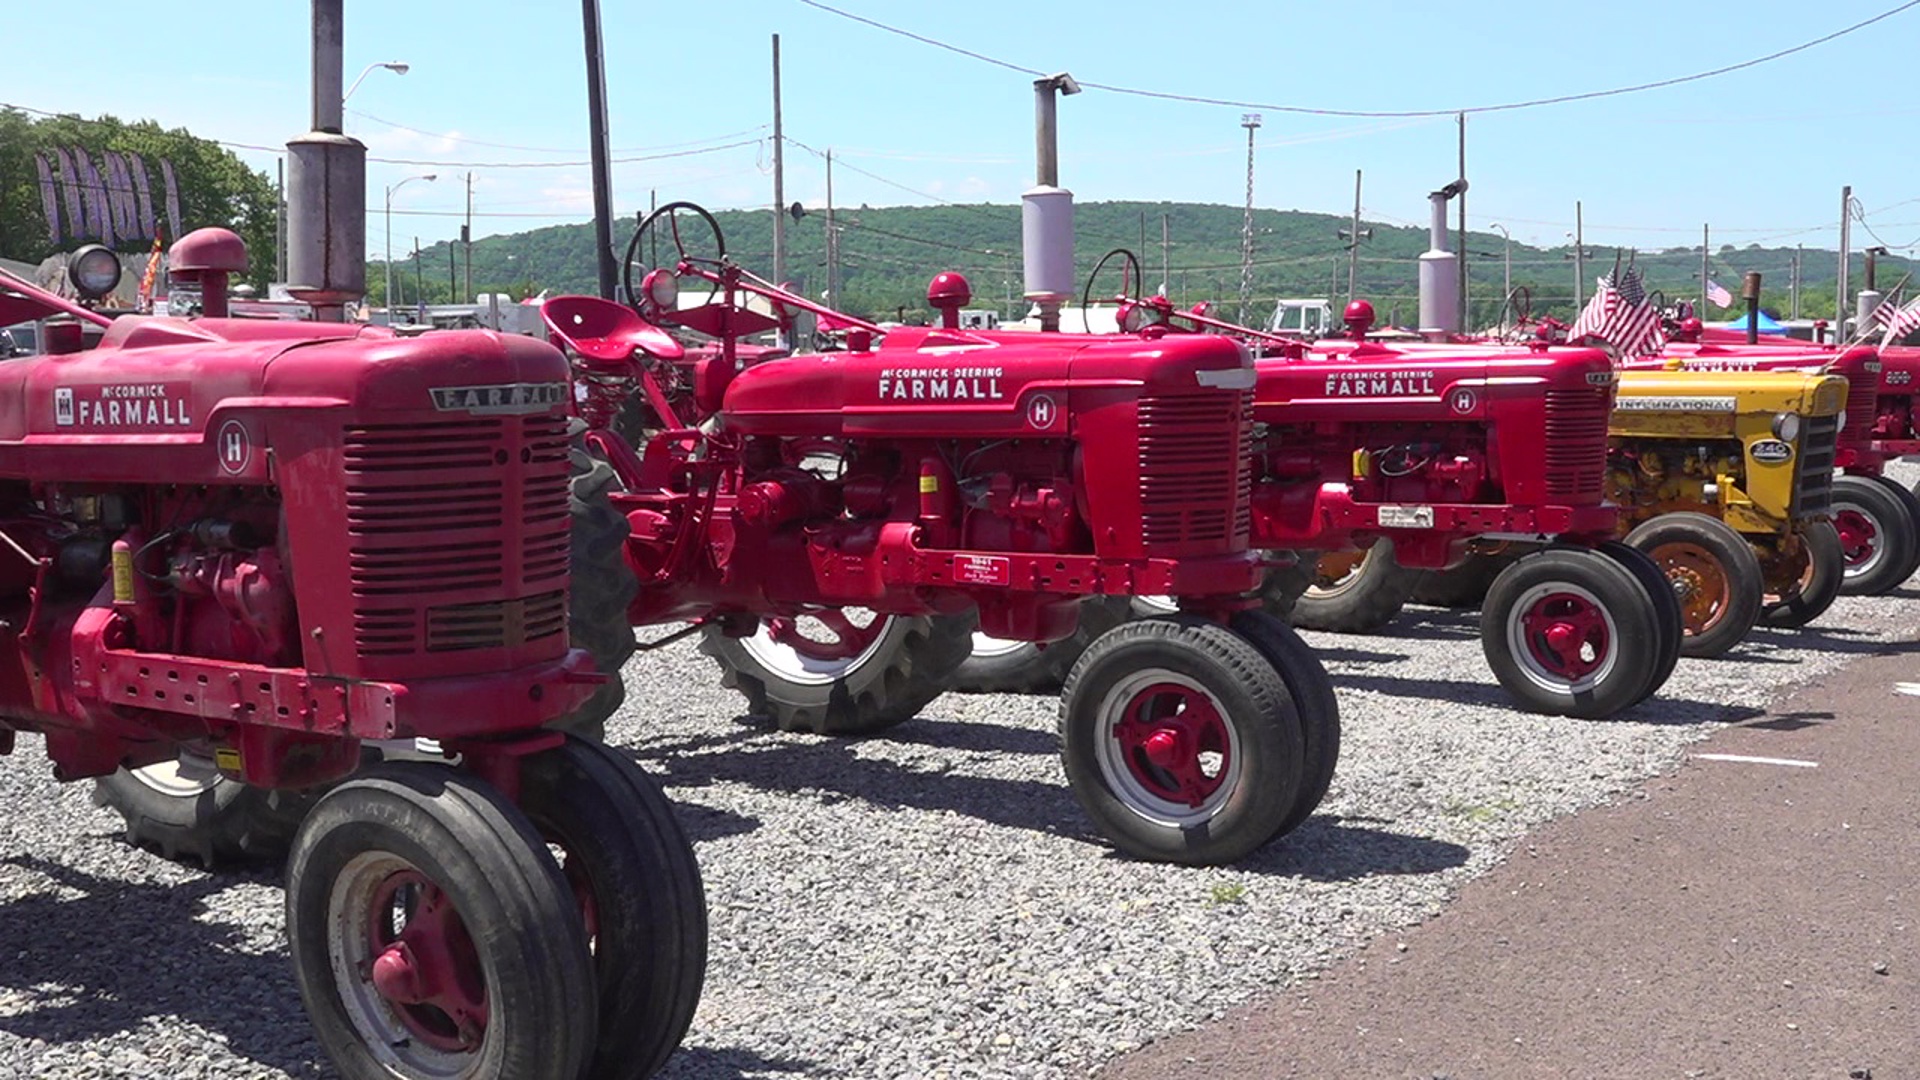 Hundreds of International Harvester tractors are on display at the Bloomsburg Fairgrounds through Saturday.